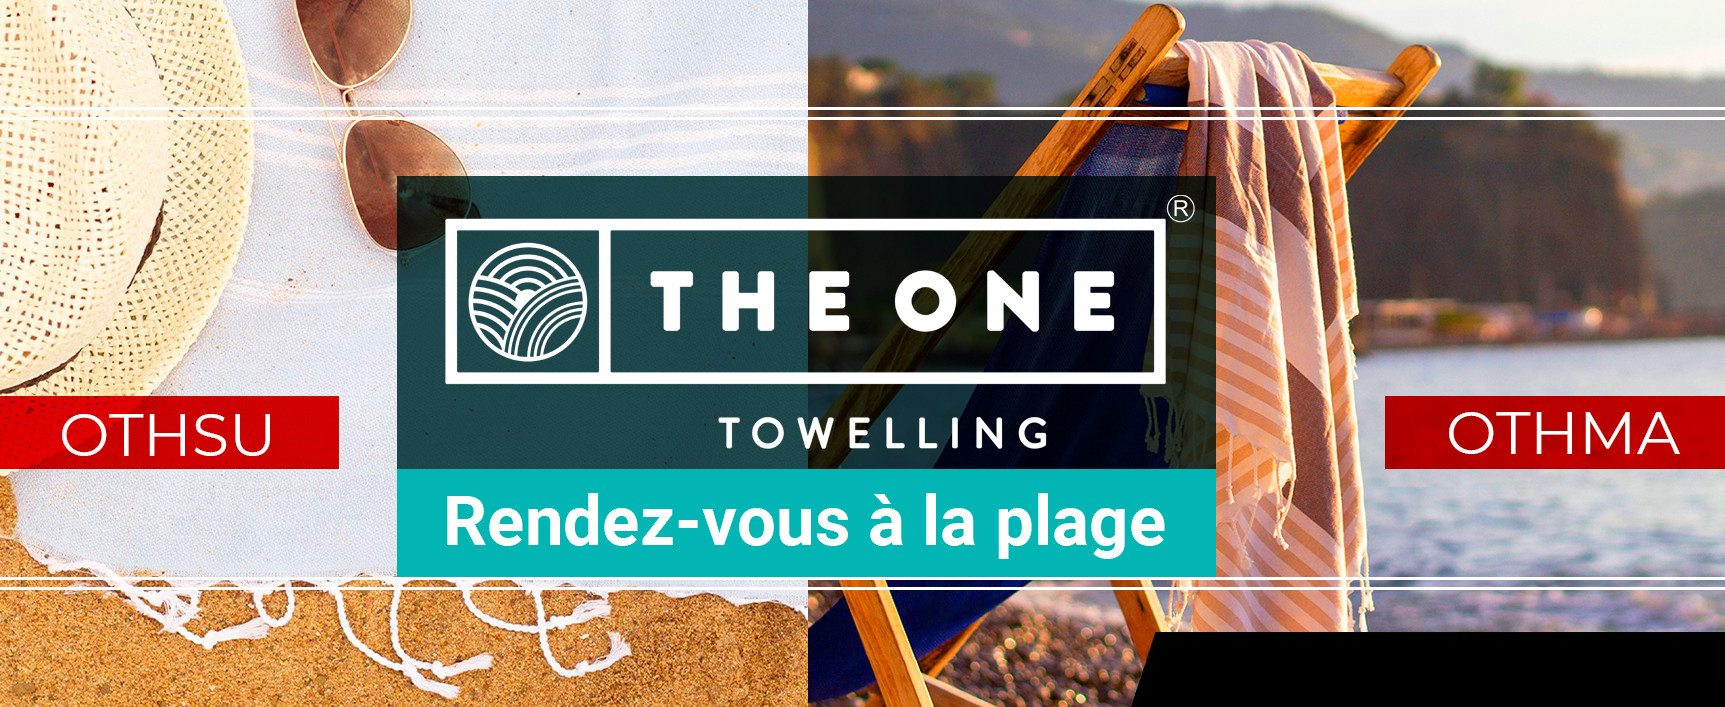 The one towelling